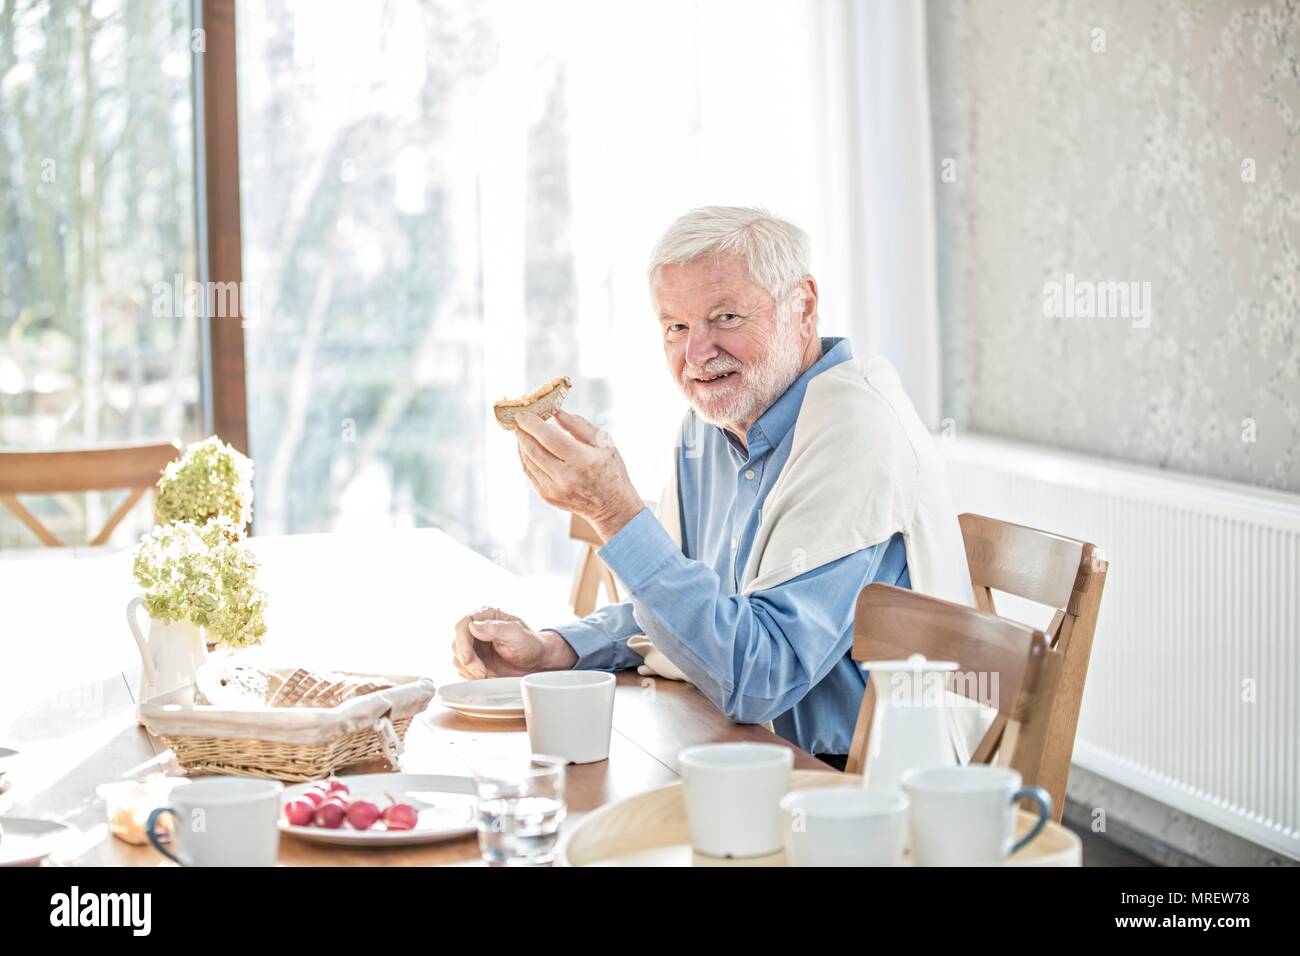 Senior man eating meal in care home. Stock Photo